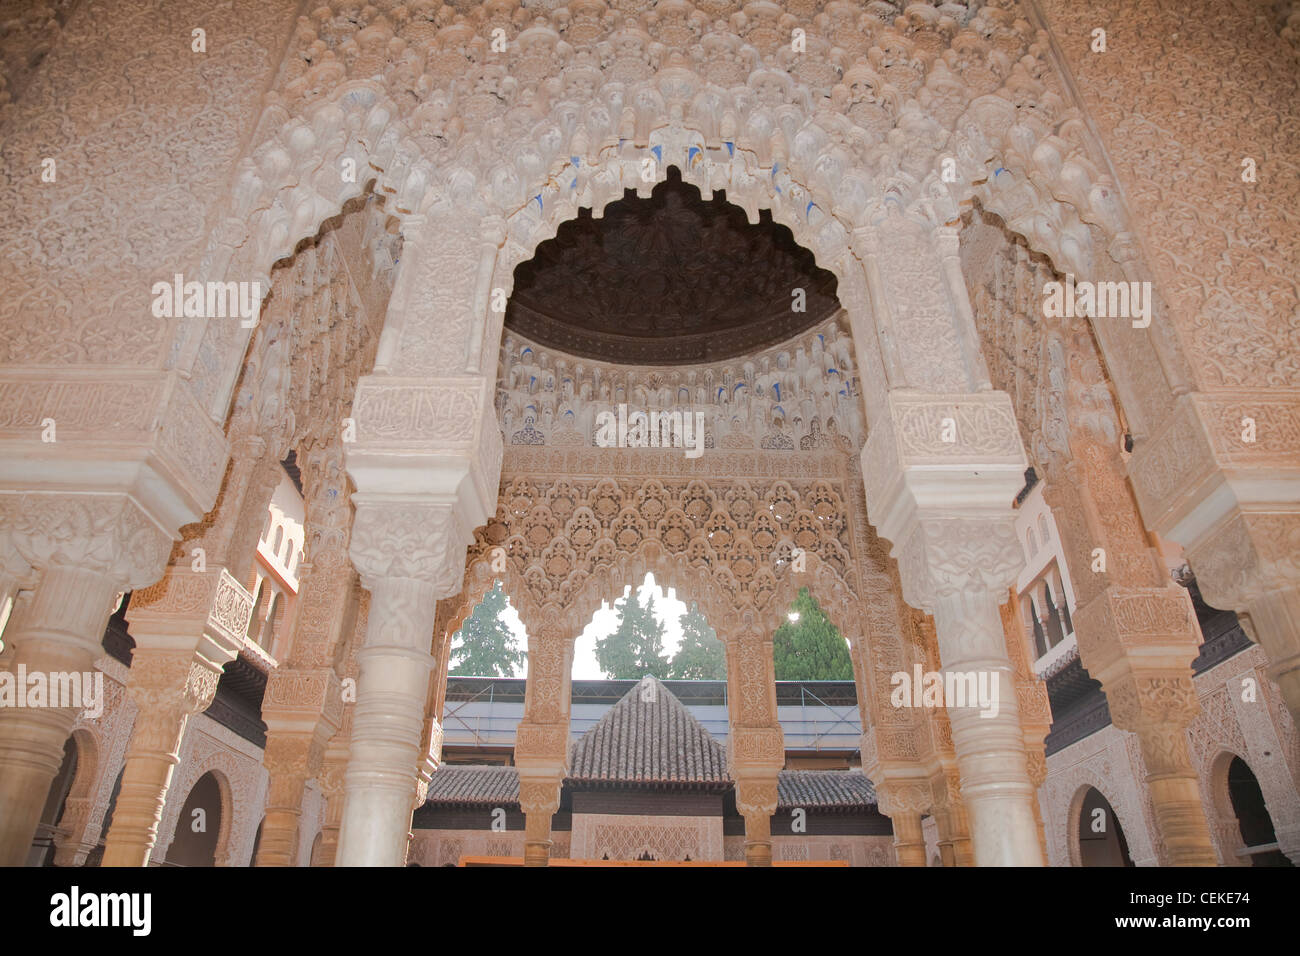 Palace Lions architectural pinnacle Alhambra Columns cubic capitals hanging spandrel work plasterwork adorn open courtyard Stock Photo